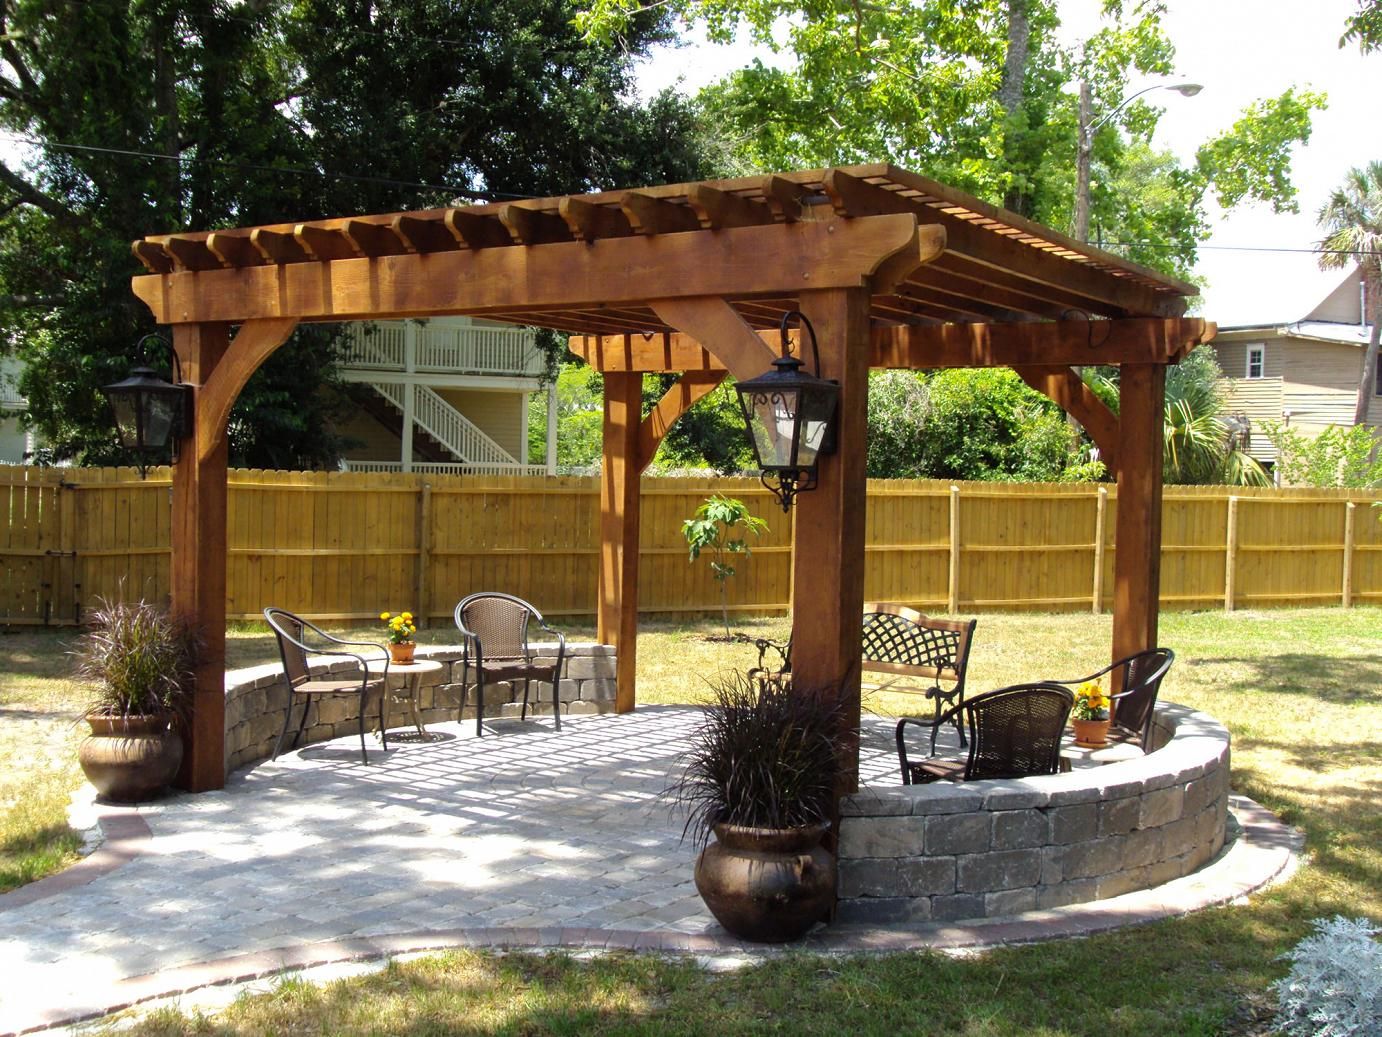 Outdoor Pergolas-Cypress TX Landscape Designs & Outdoor Living Areas-We offer Landscape Design, Outdoor Patios & Pergolas, Outdoor Living Spaces, Stonescapes, Residential & Commercial Landscaping, Irrigation Installation & Repairs, Drainage Systems, Landscape Lighting, Outdoor Living Spaces, Tree Service, Lawn Service, and more.